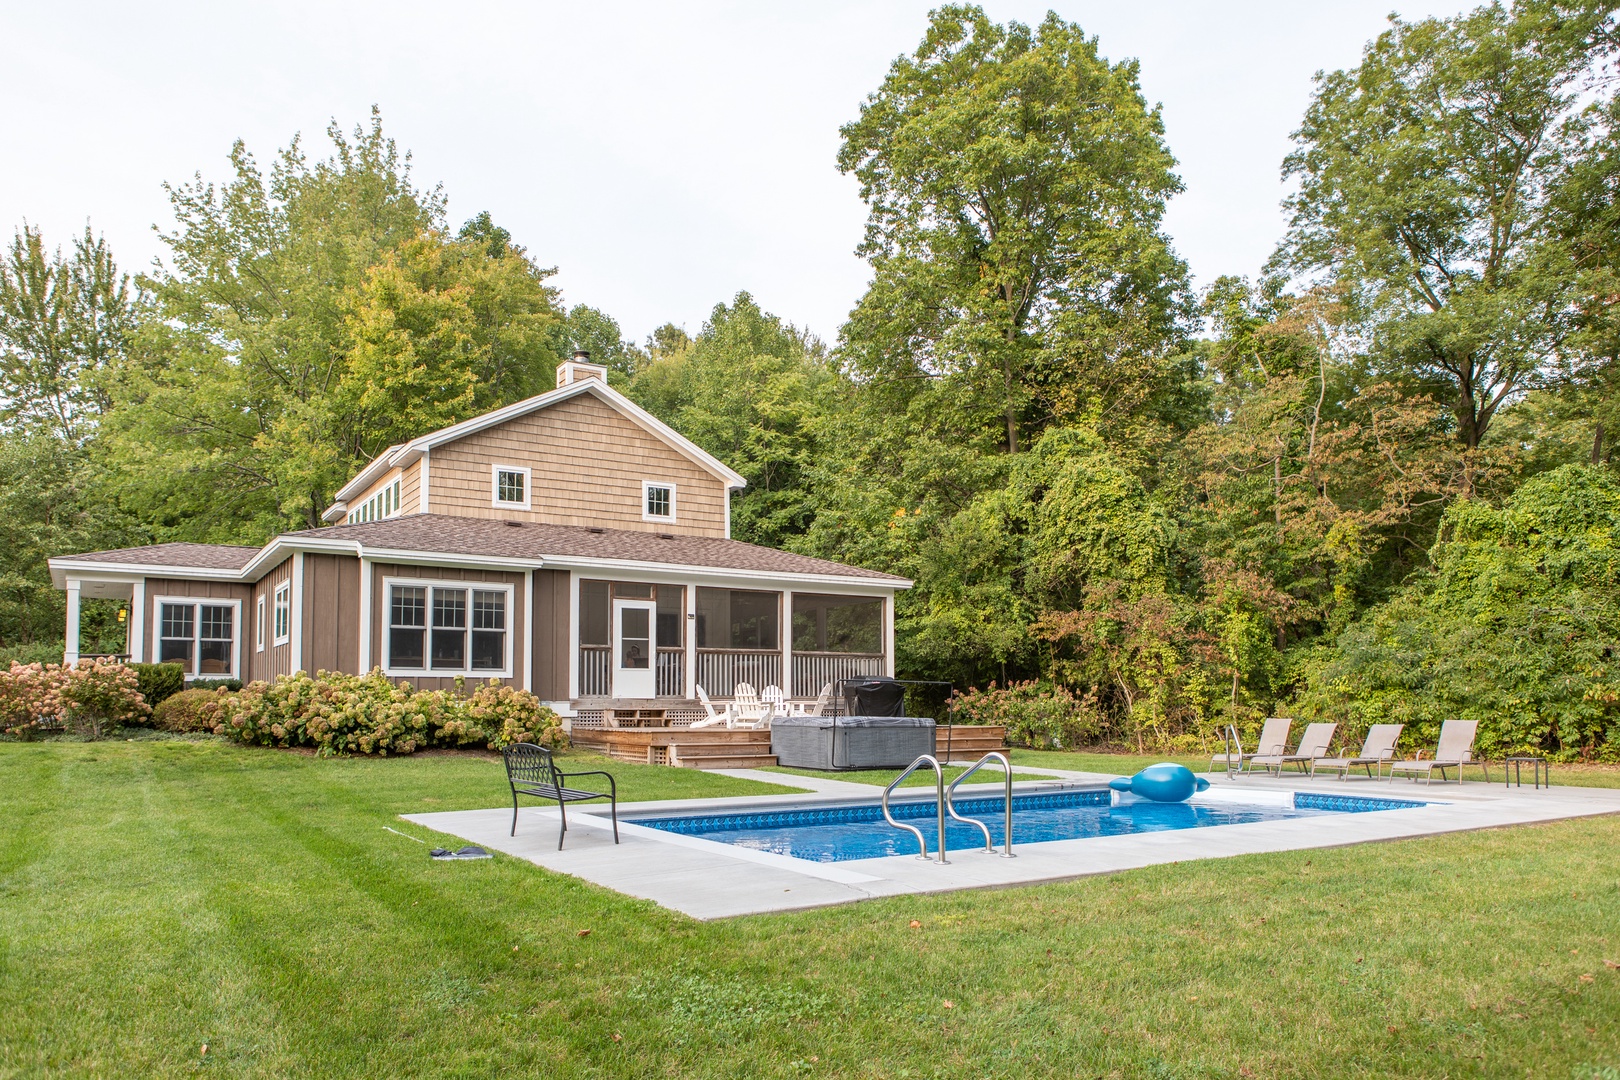 An entertainer’s dream, the backyard is ideal for yard games, swimming, relaxing and all-around fun.